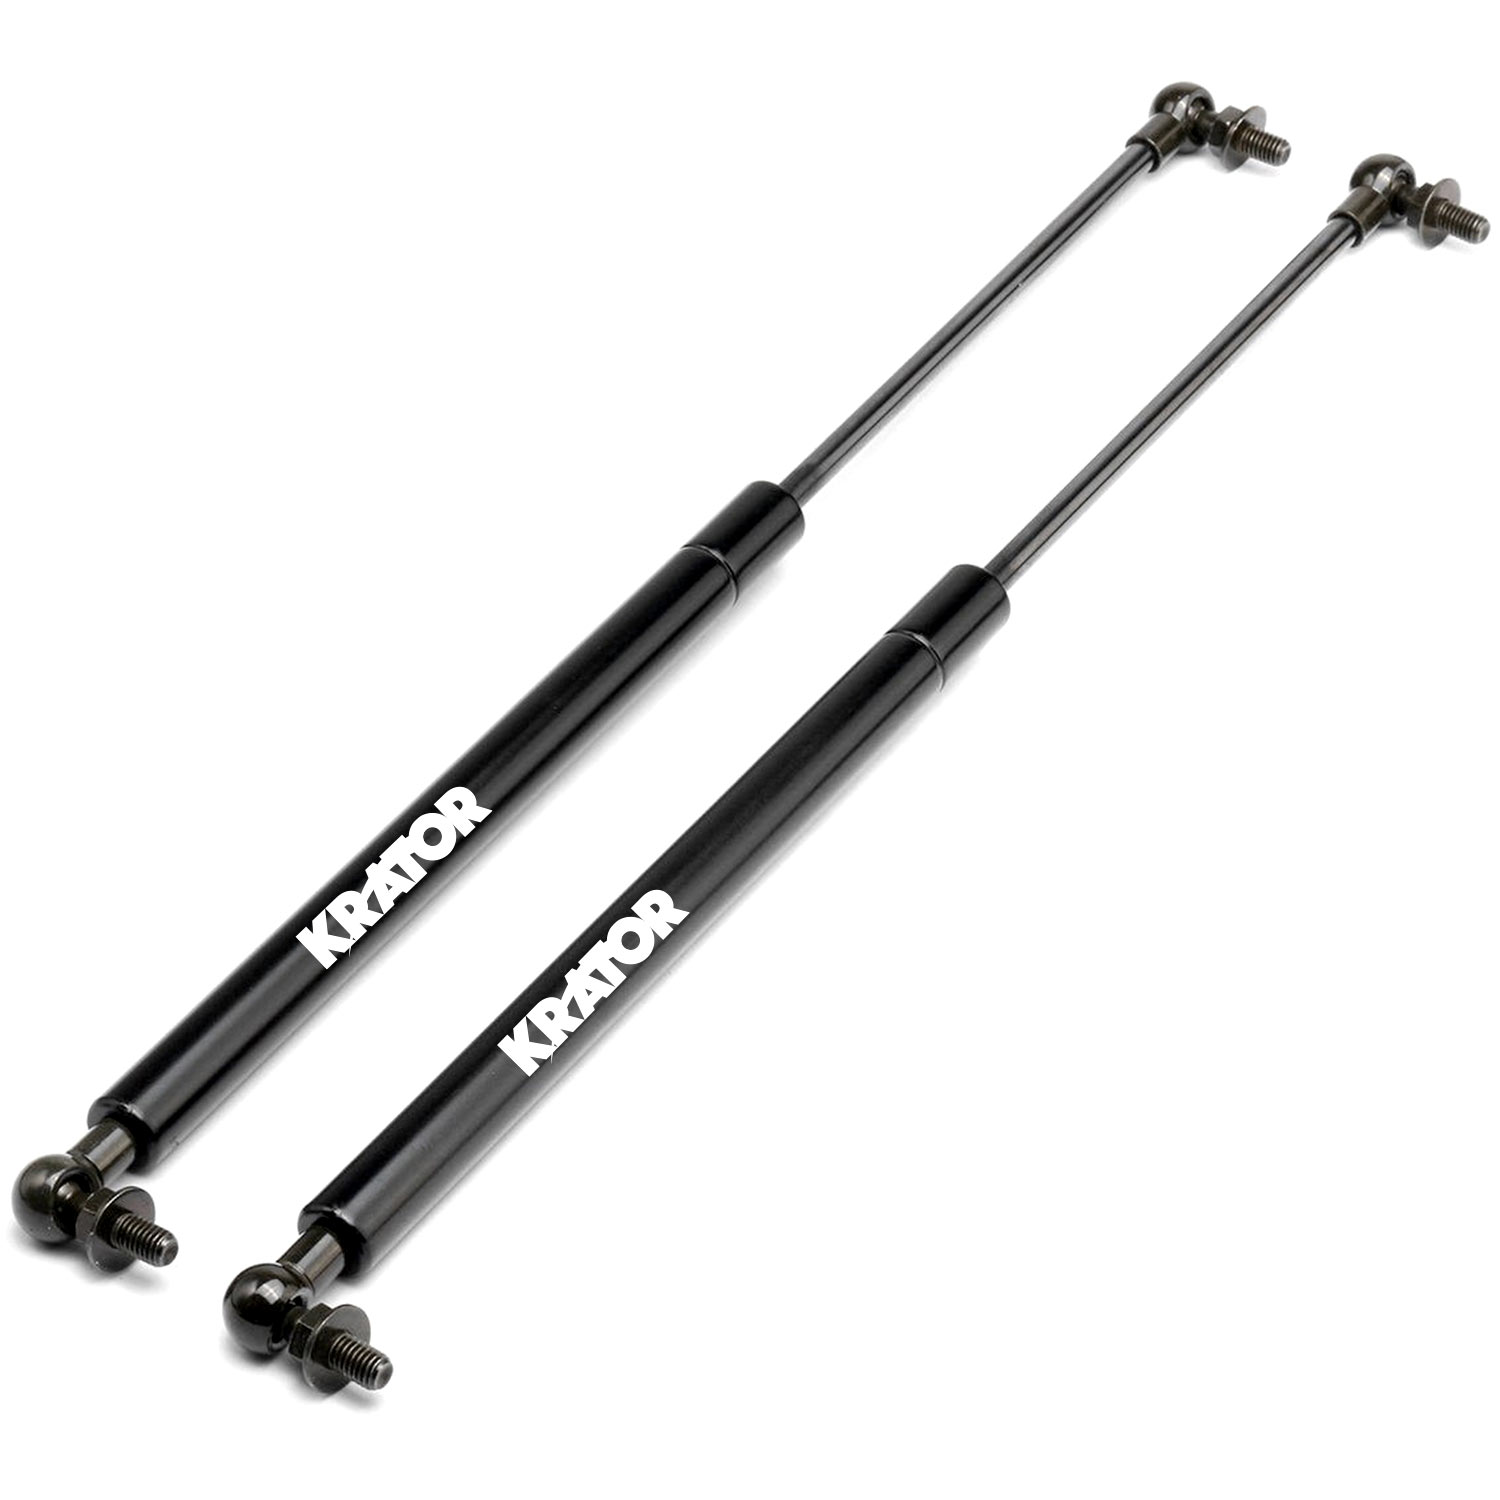 Krator 2pcs 6228 Replacement Hood Lift Supports, Gas Strut Prop Arms, Gas Spring Shocks, Lid Support, Lid Stay, Force Output 396N - 6228, 036150, 5345039225, 5344069065, 5345069065, 53440-69065 - image 1 of 5